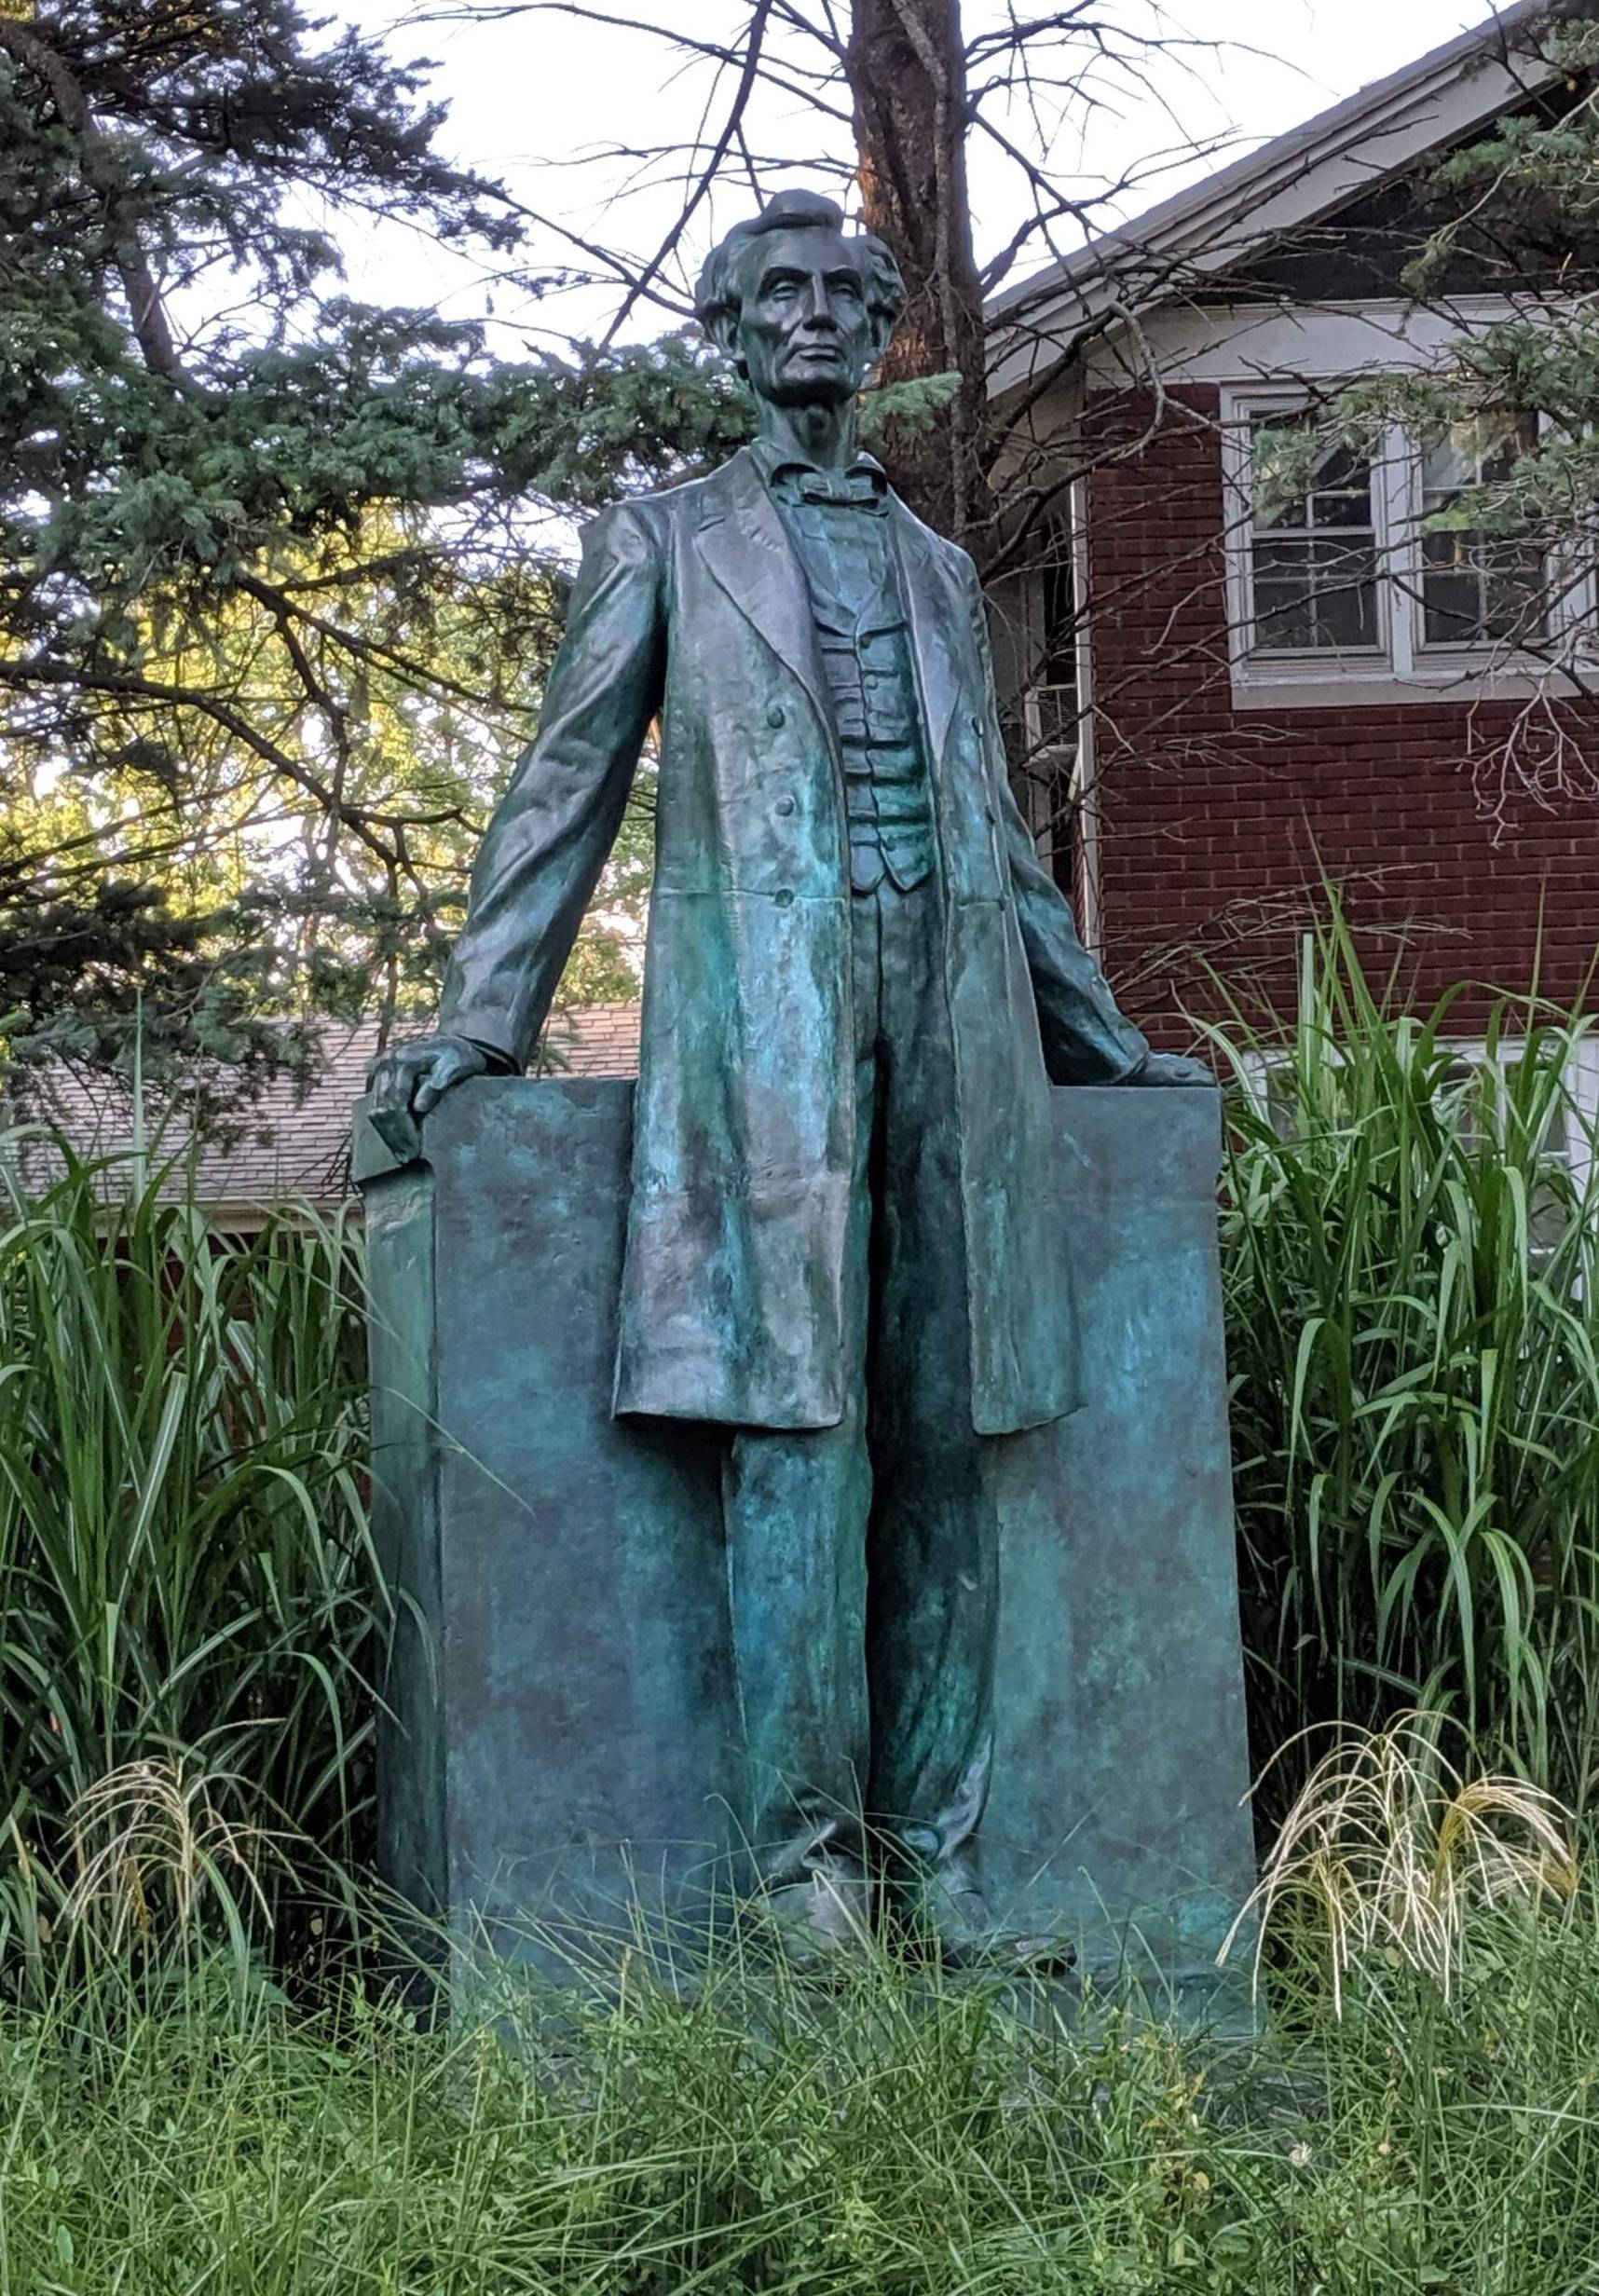 Image: A bronze statue of Abraham Lincoln, now green from oxidation. It is a full length statue, and the figure is leaning on a pedestal. The figure is wearing a long coat and vest. It is surrounded by overgrown grass. A house with red bricks is in the background. Photo by Katriena Knights.